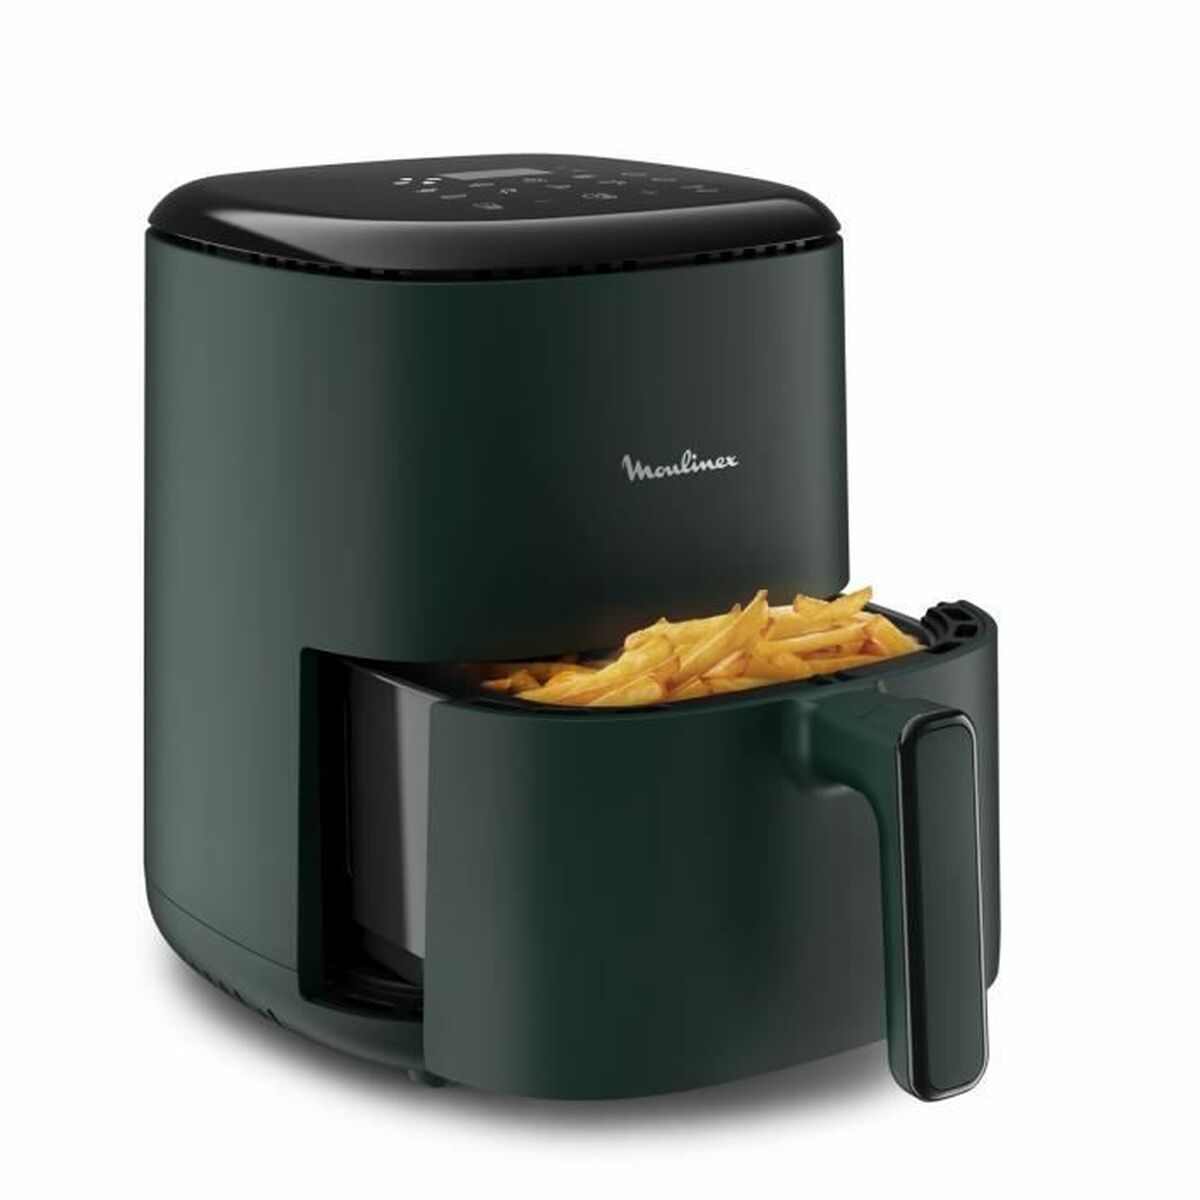 Luchtfriteuse Moulinex 1300 W 3 L